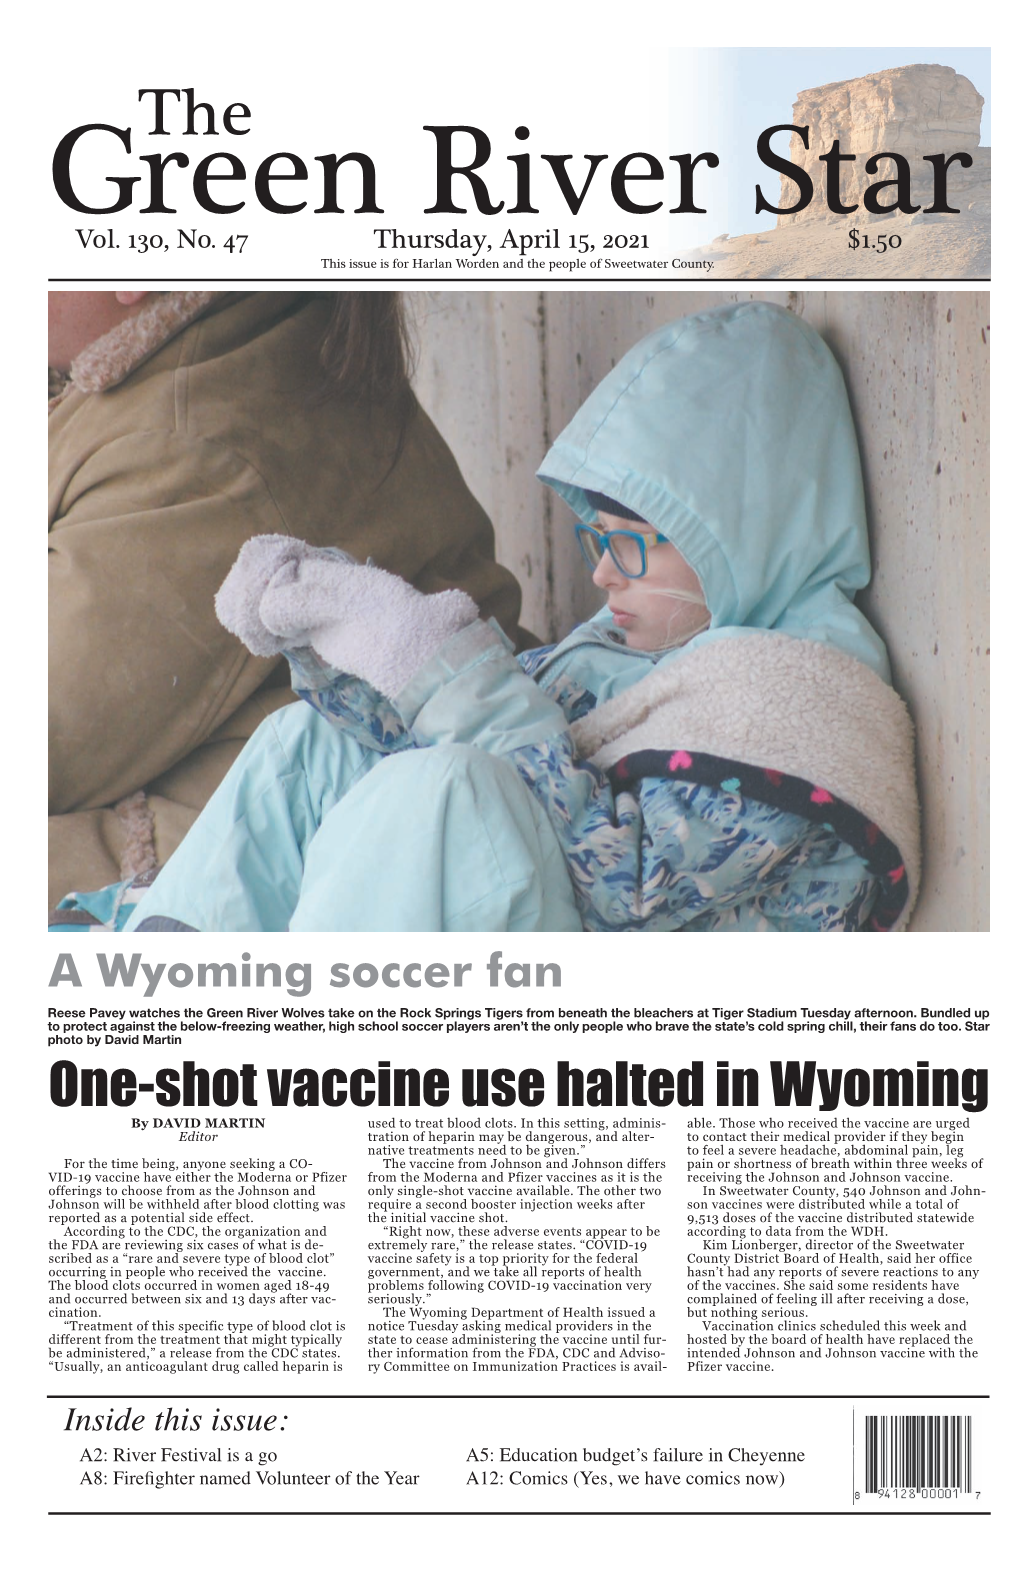 One-Shot Vaccine Use Halted in Wyoming by DAVID MARTIN Used to Treat Blood Clots